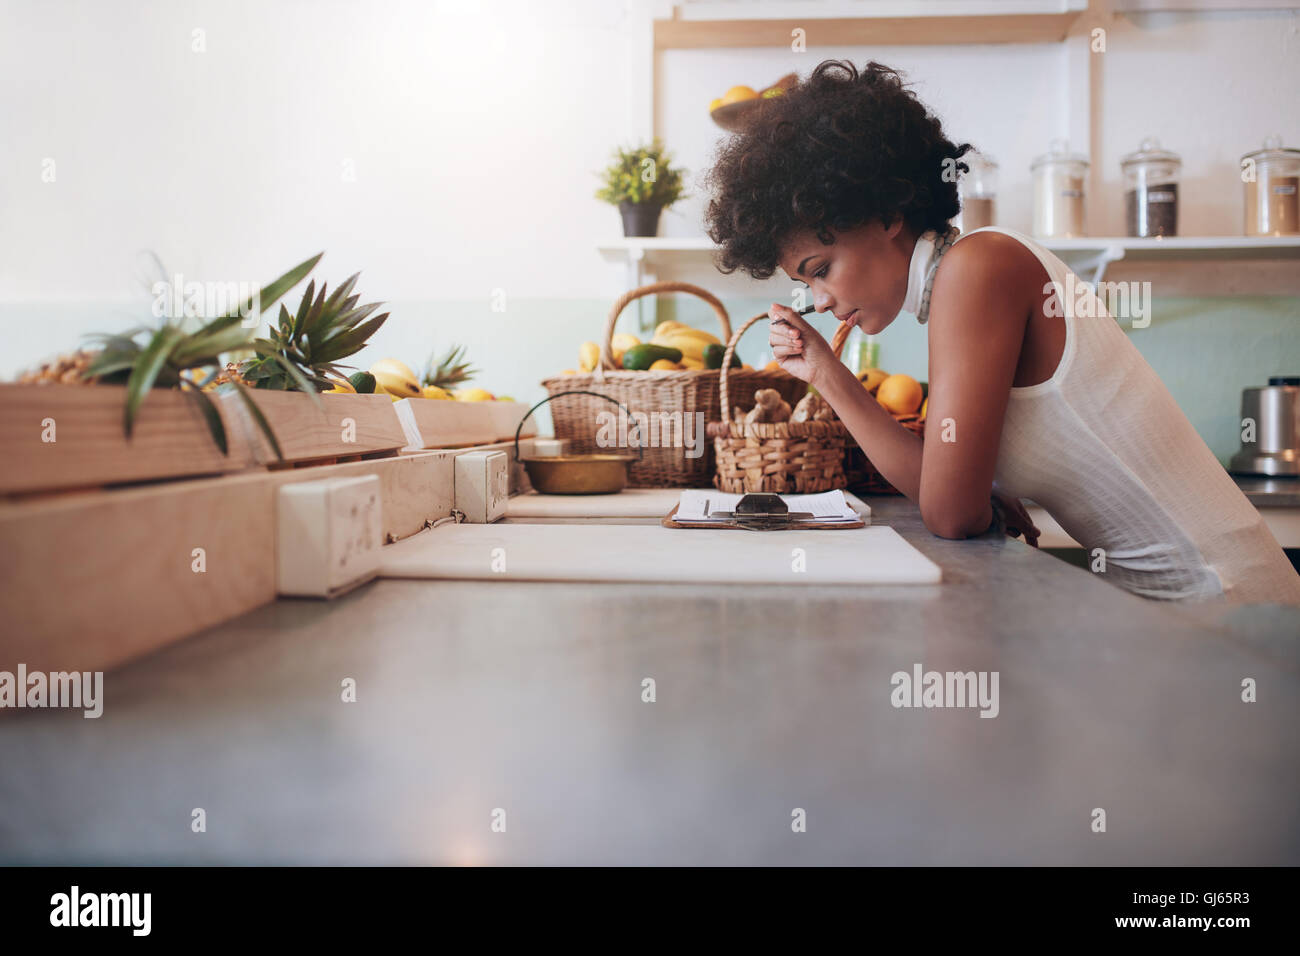 Female proprietor of a juice bar calculating a her business expenses. African young woman looking at the clip board on counter. Stock Photo